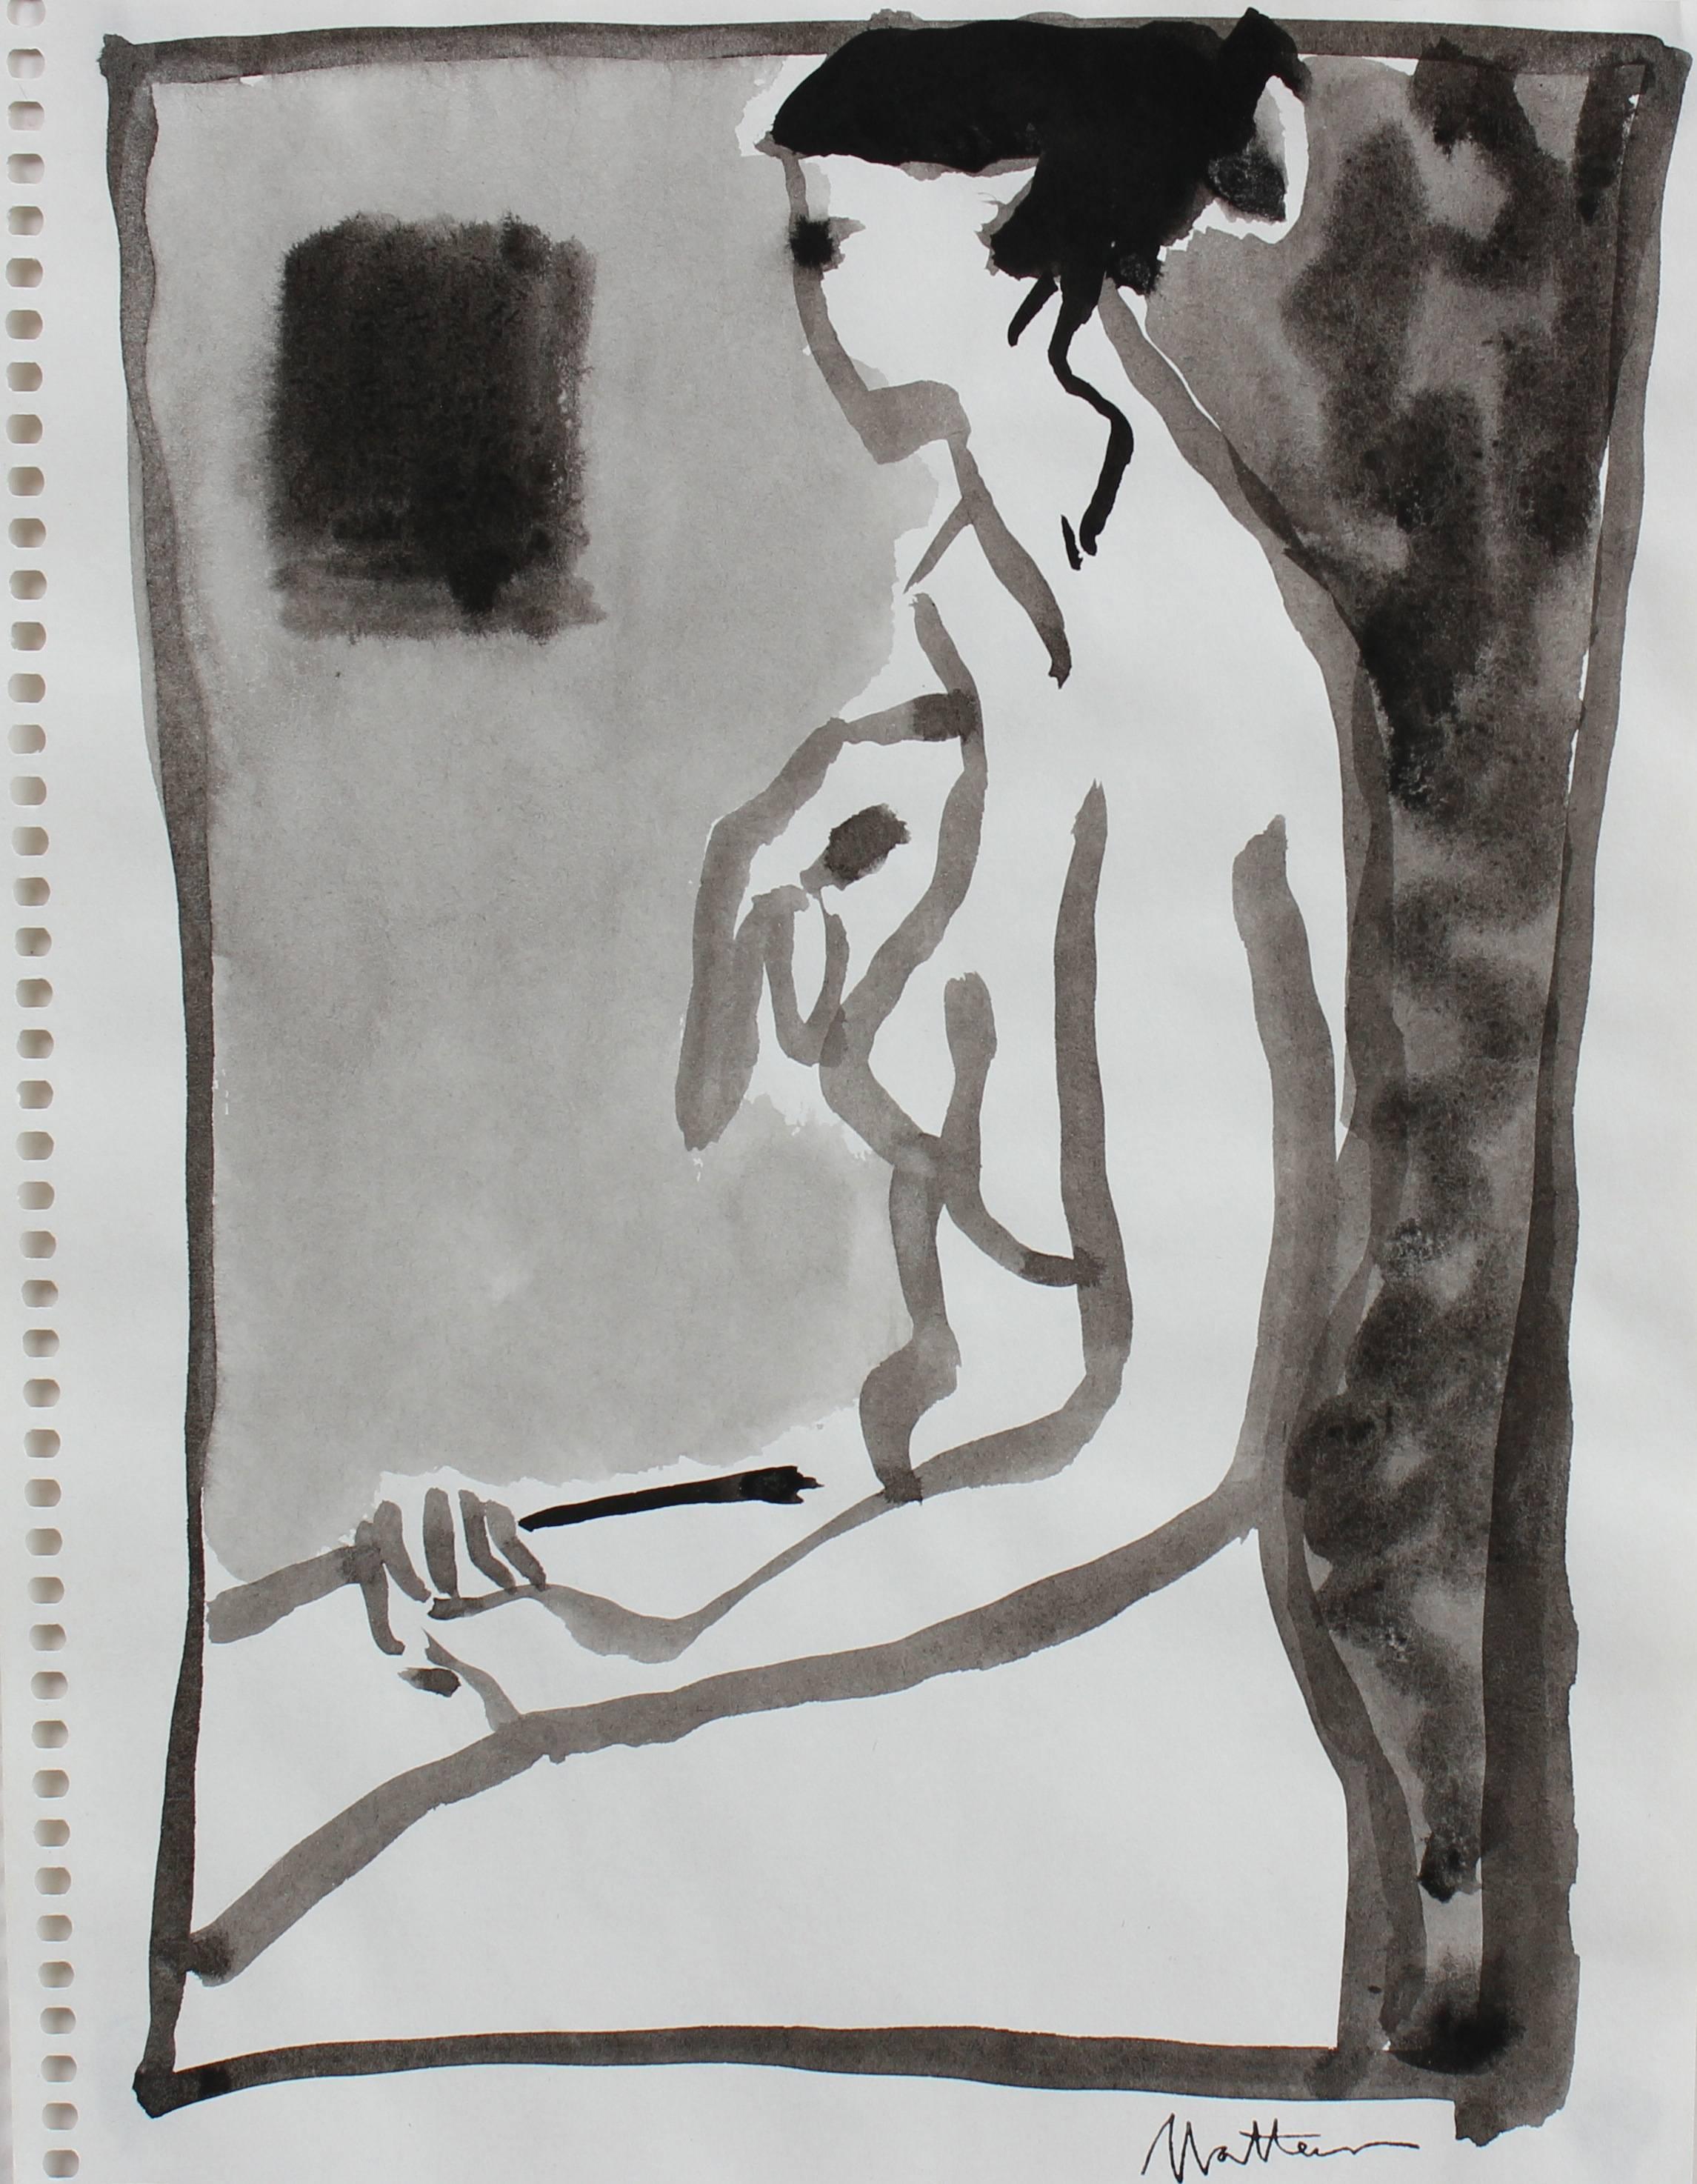 Monochromatic Female Nude, Ink Wash on Paper, 20th Century - Art by Rip Matteson